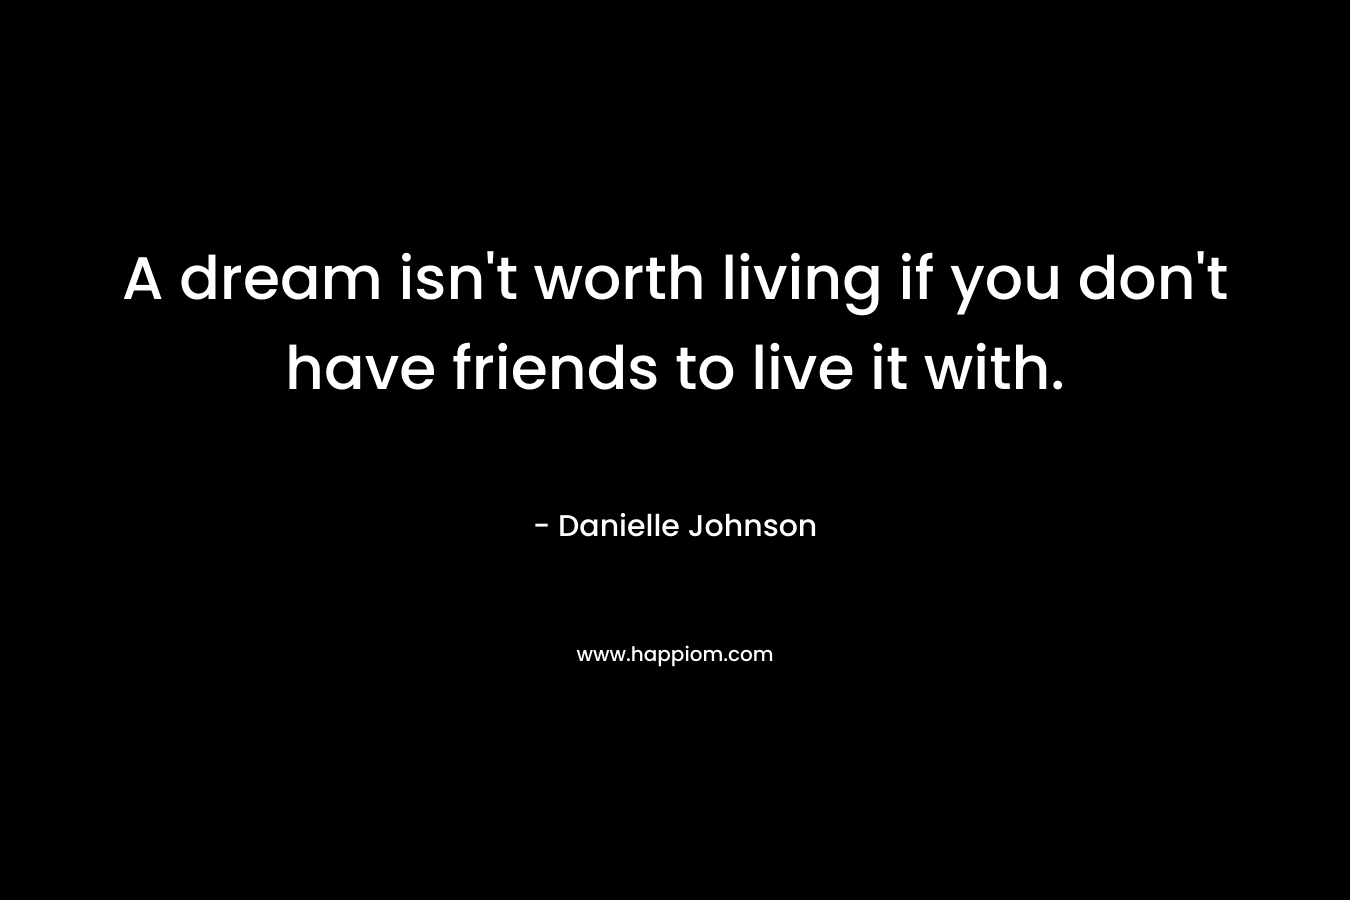 A dream isn't worth living if you don't have friends to live it with.